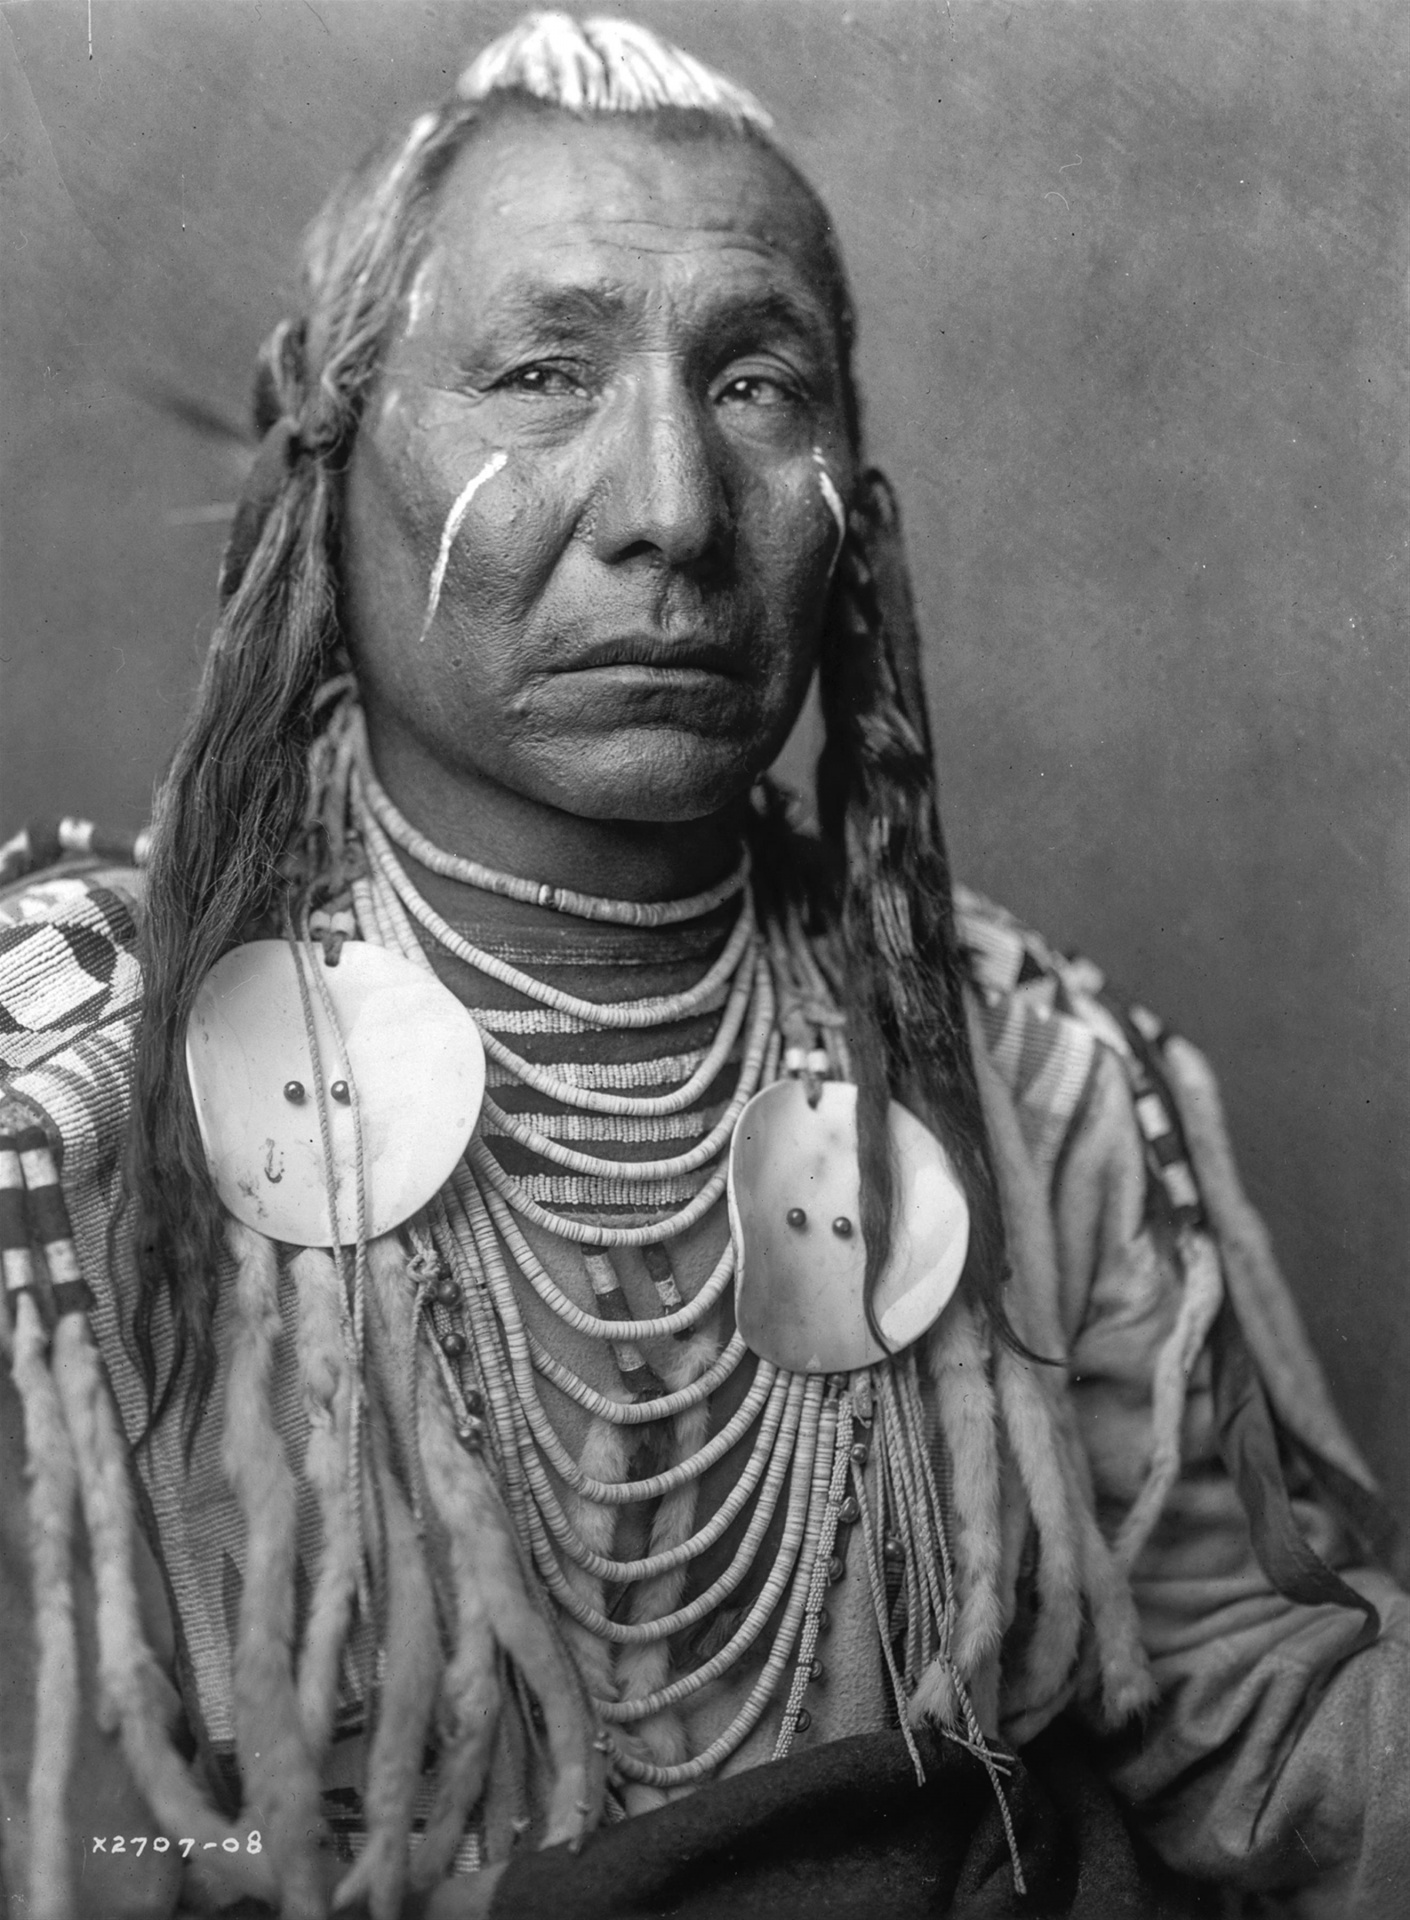 Historical Indian American Chief - beautiful vintage digital photography image. A view into the culture and traditions of Indo-Americans